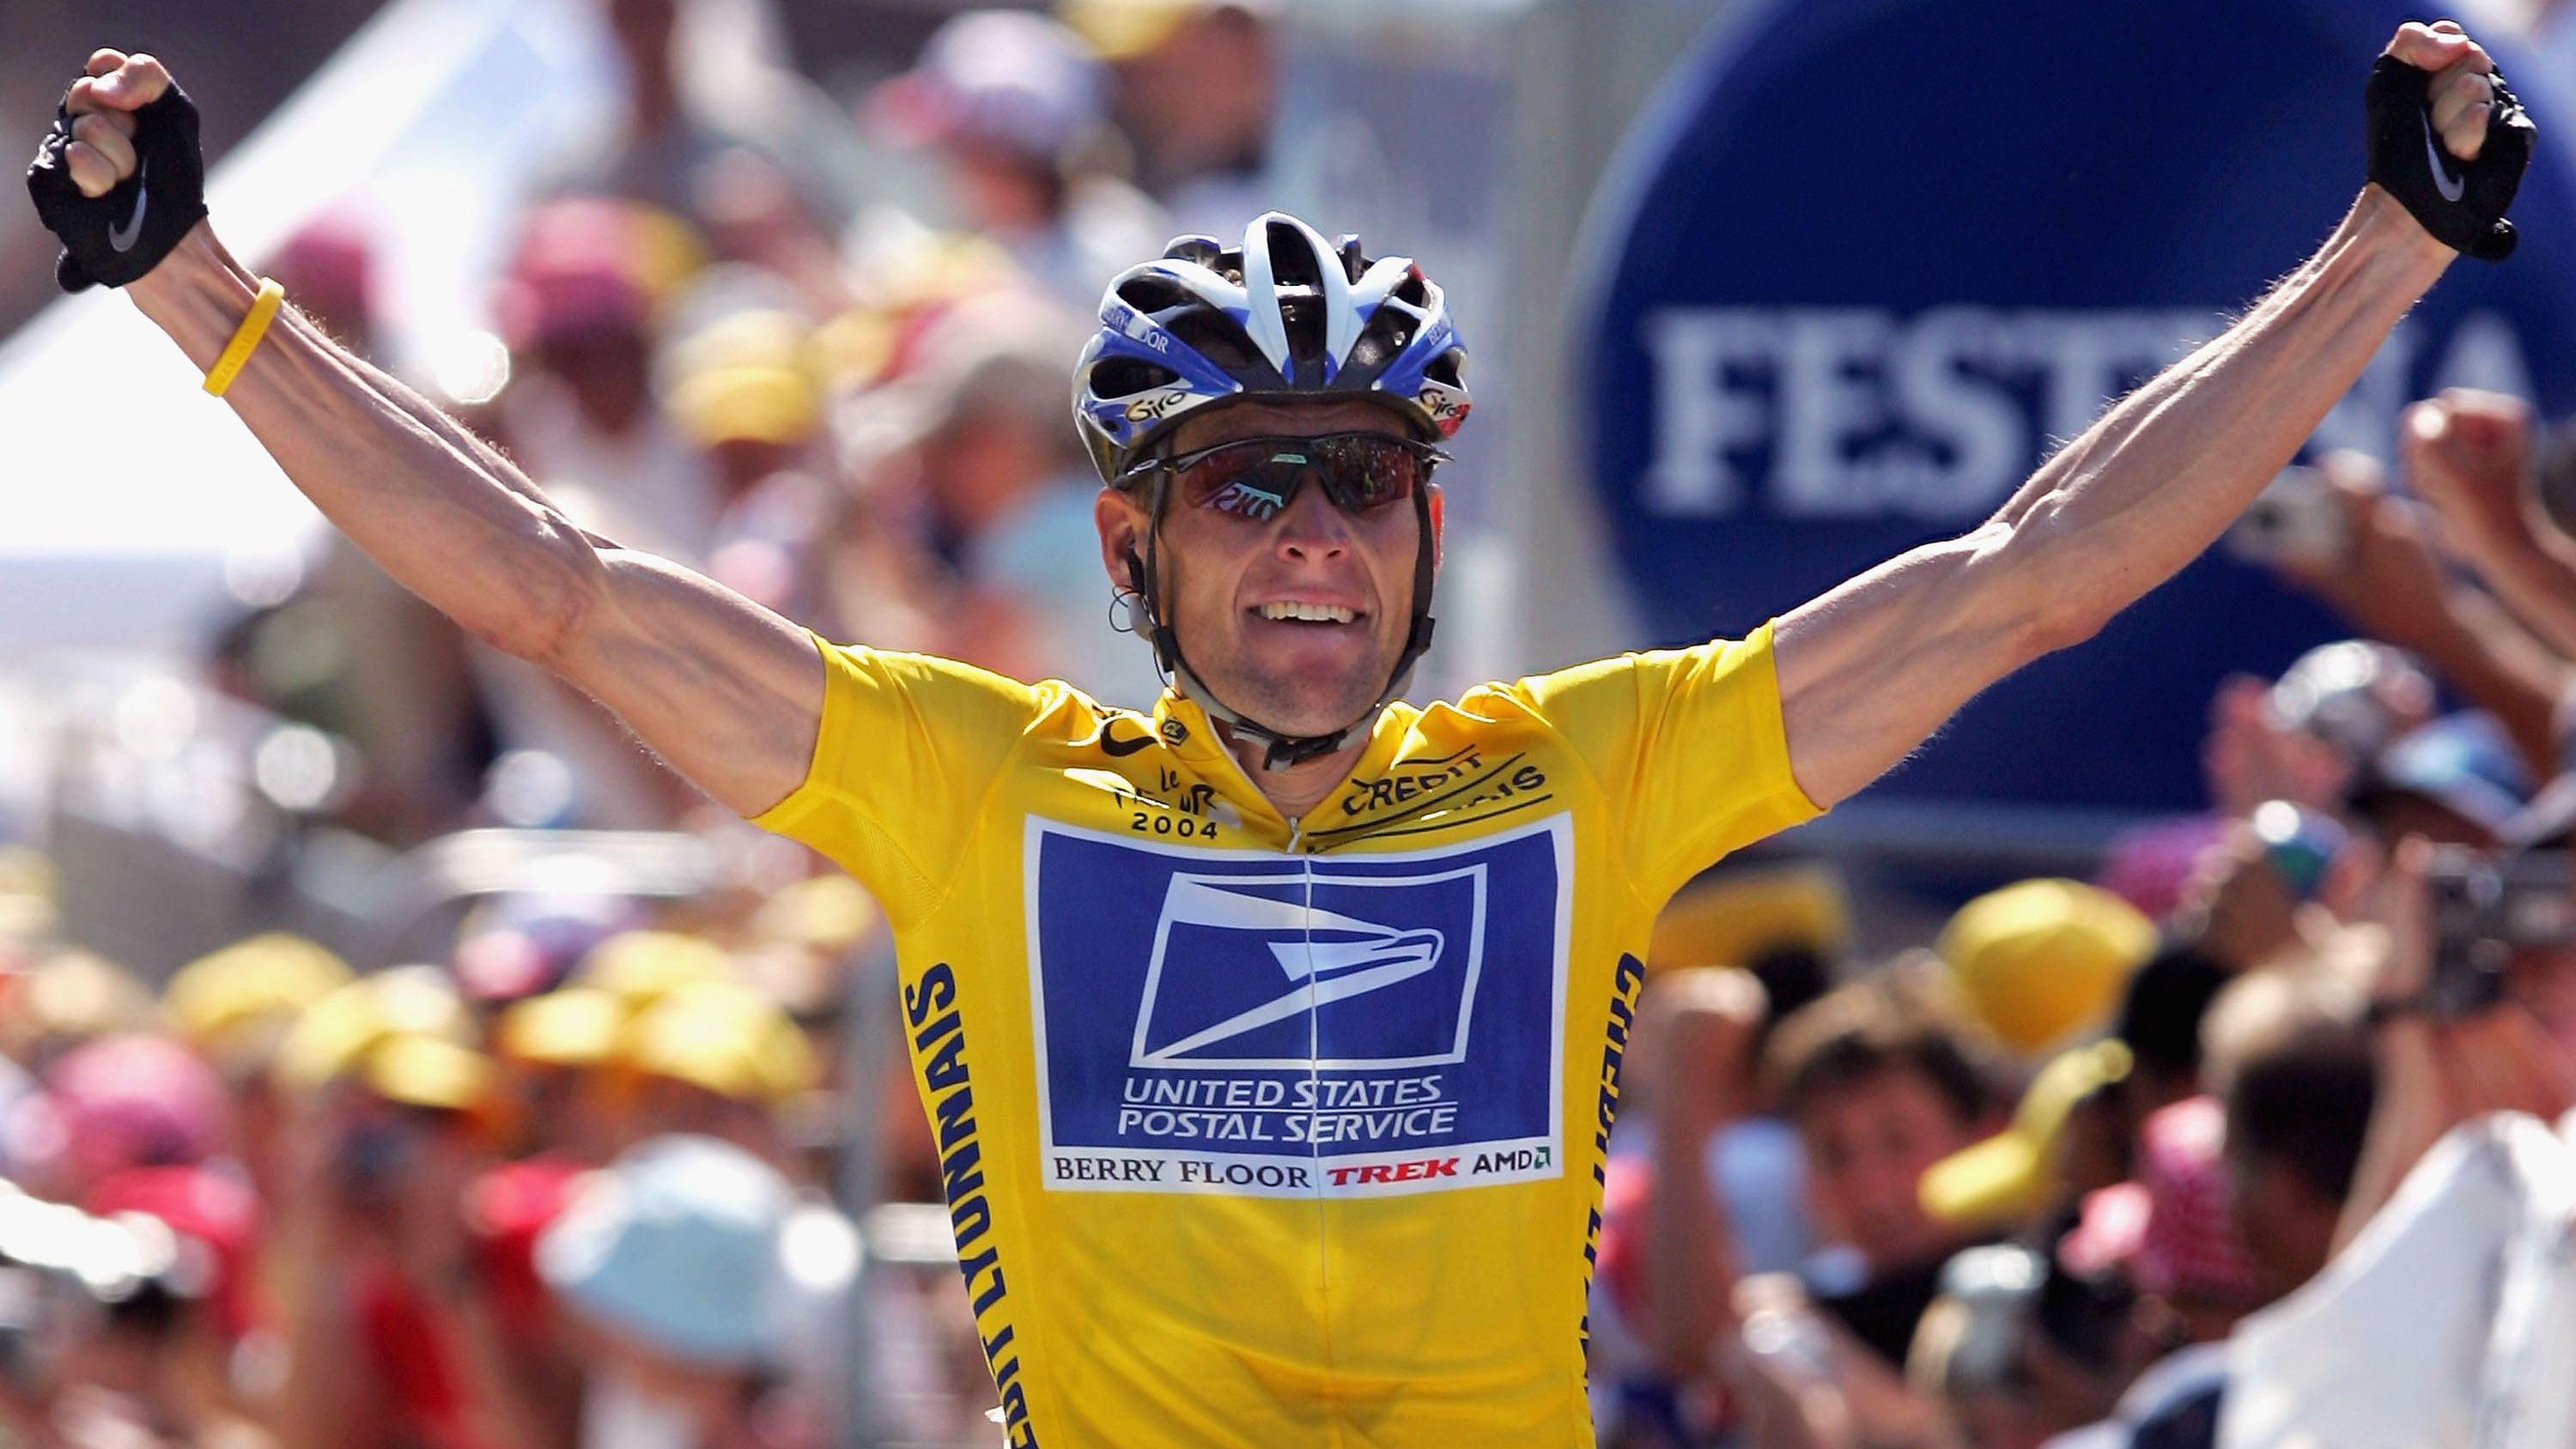 Lance Armstrong celebrates as he wins stage 17 of the Tour de France in 2004.